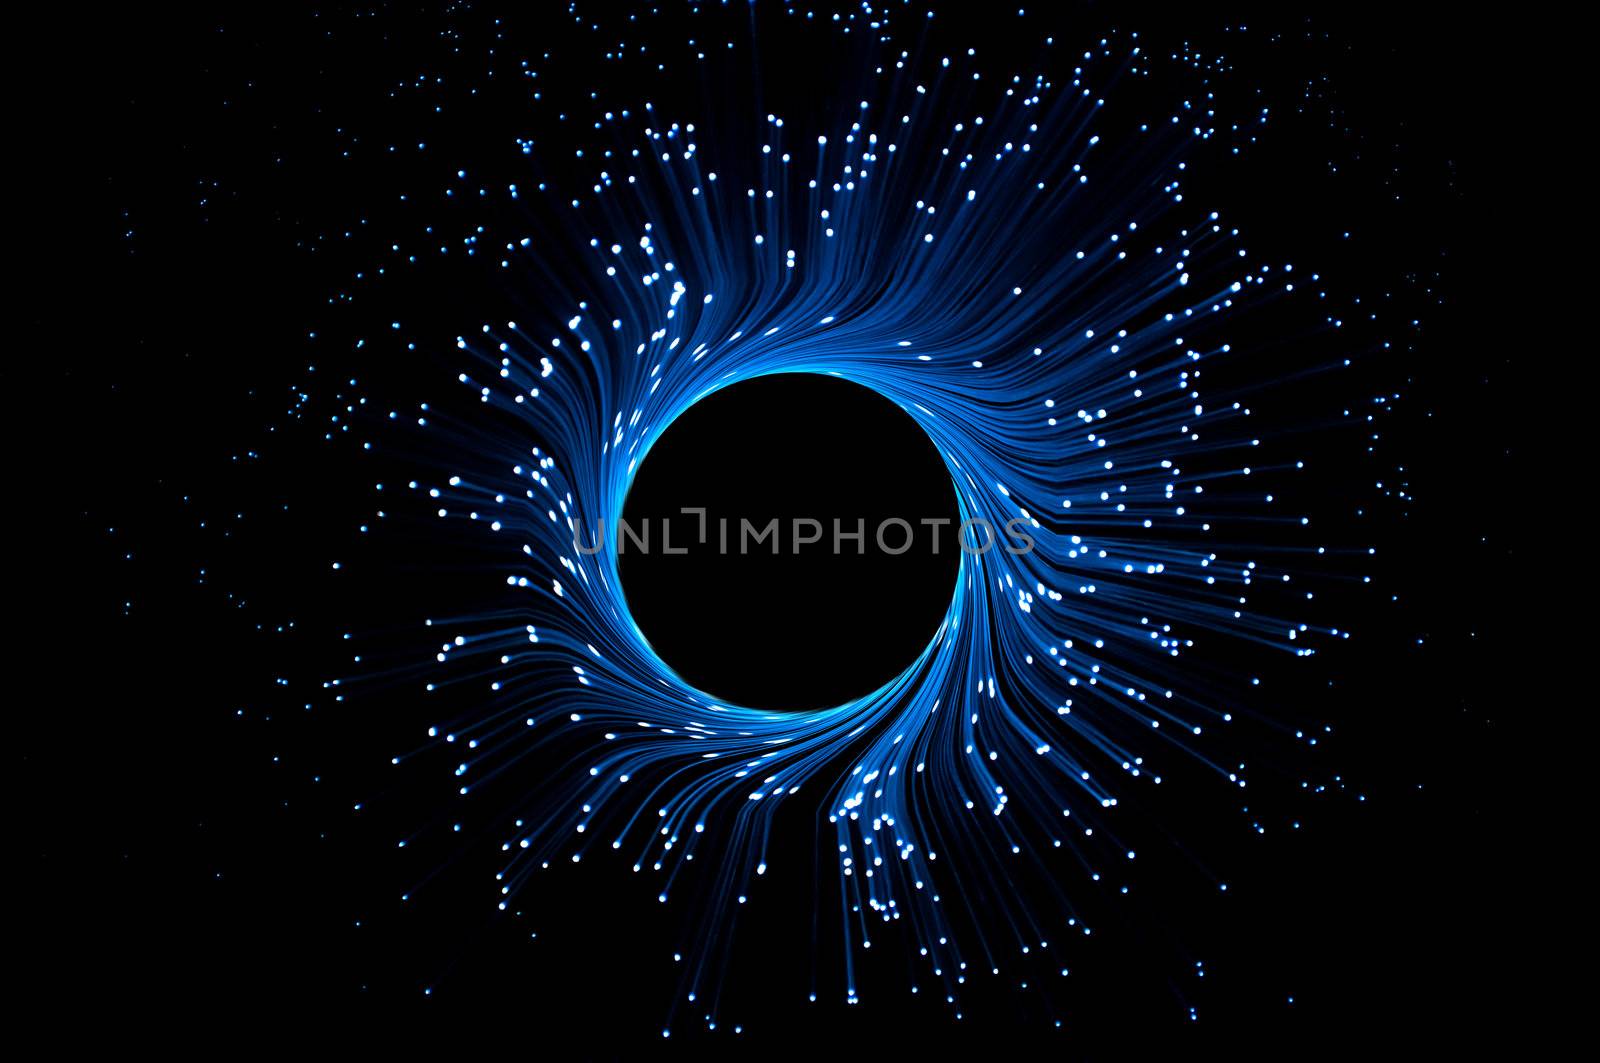 Illuminated blue fiber optic light strands forming a ring against a black background